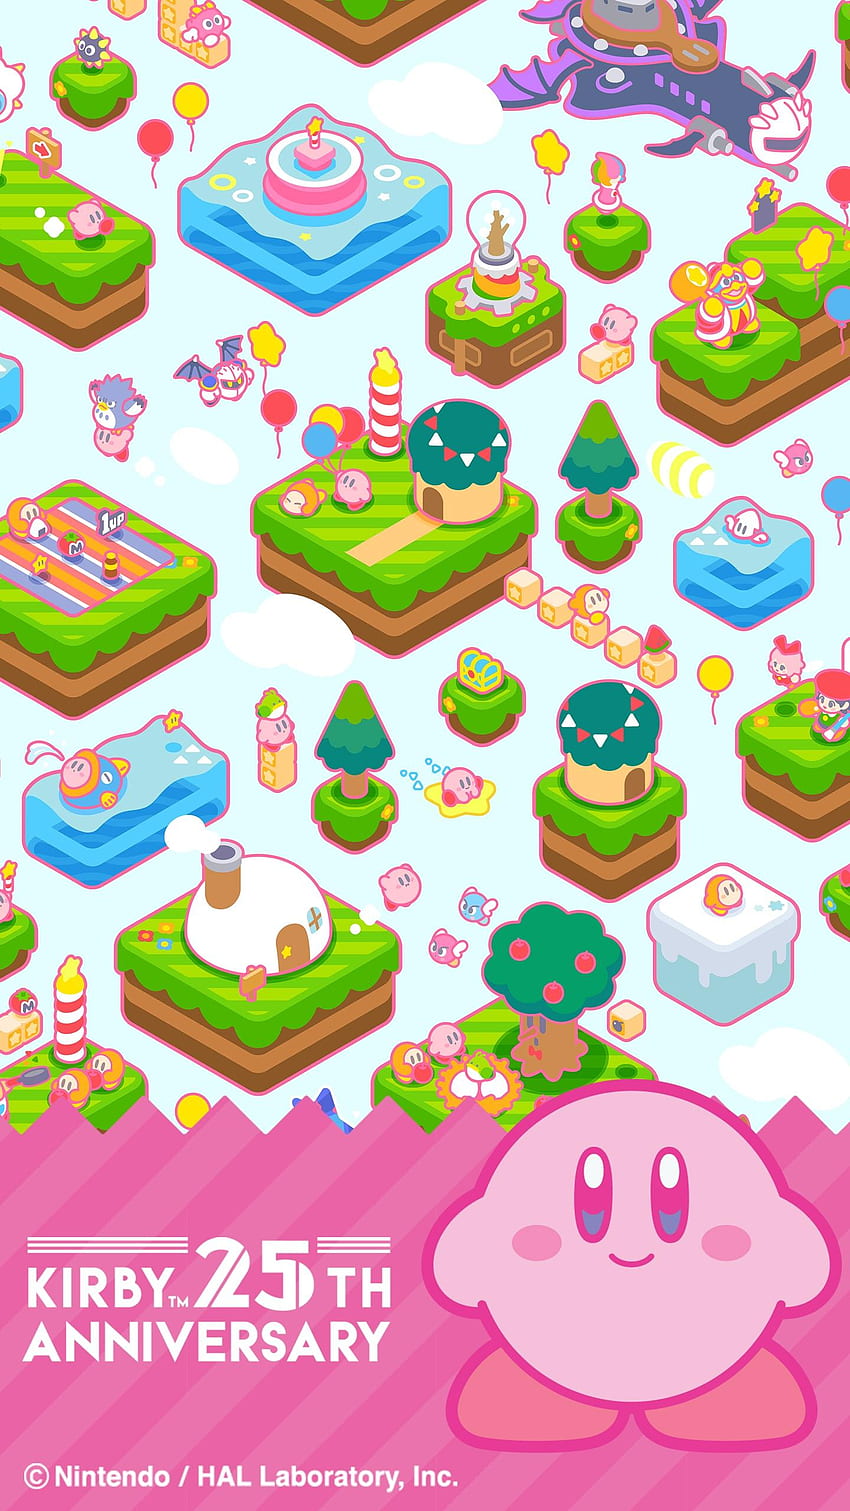 Nintendo Releases An Awesome Wallpaper To Celebrate Kirby's 30th